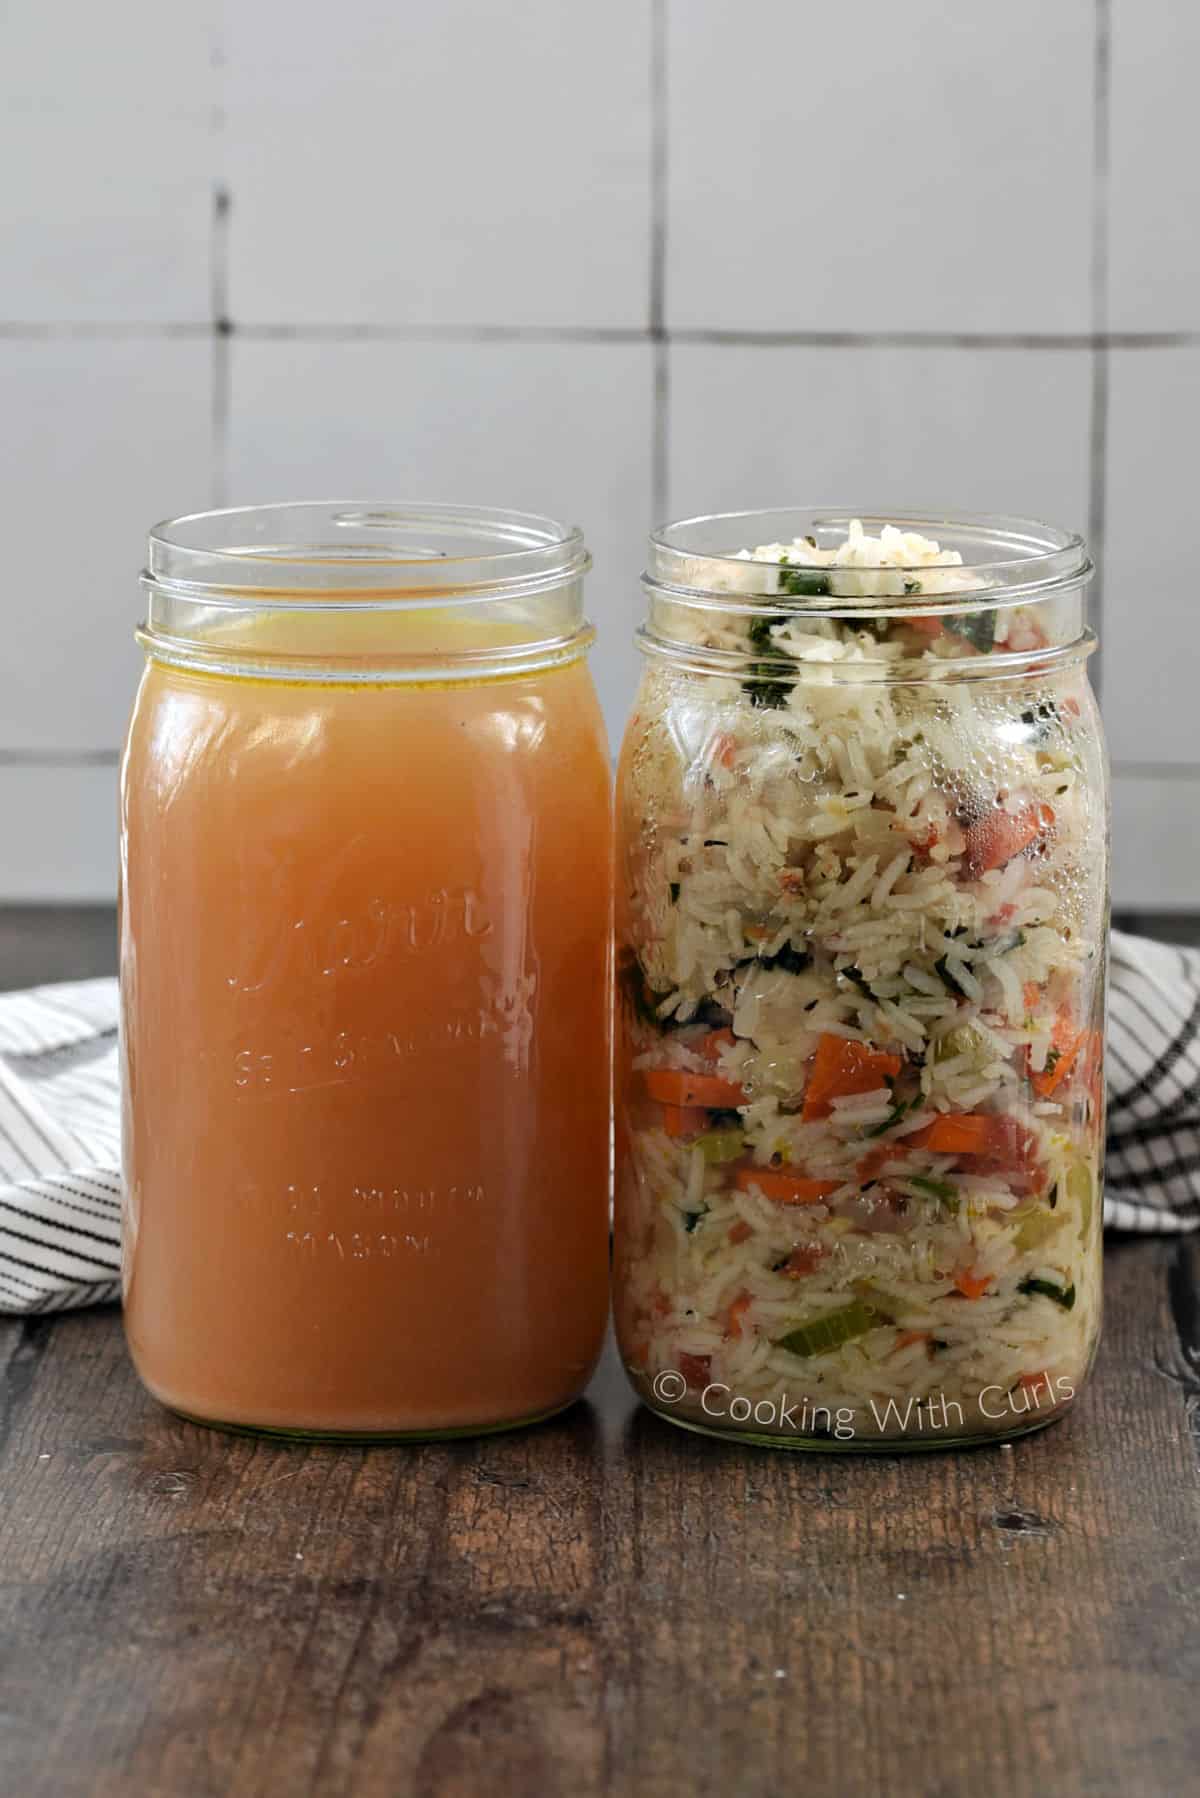 A jar of chicken stock and a jar of rice, carrots, kale, tomato, and celery sitting on a wooden surface. 